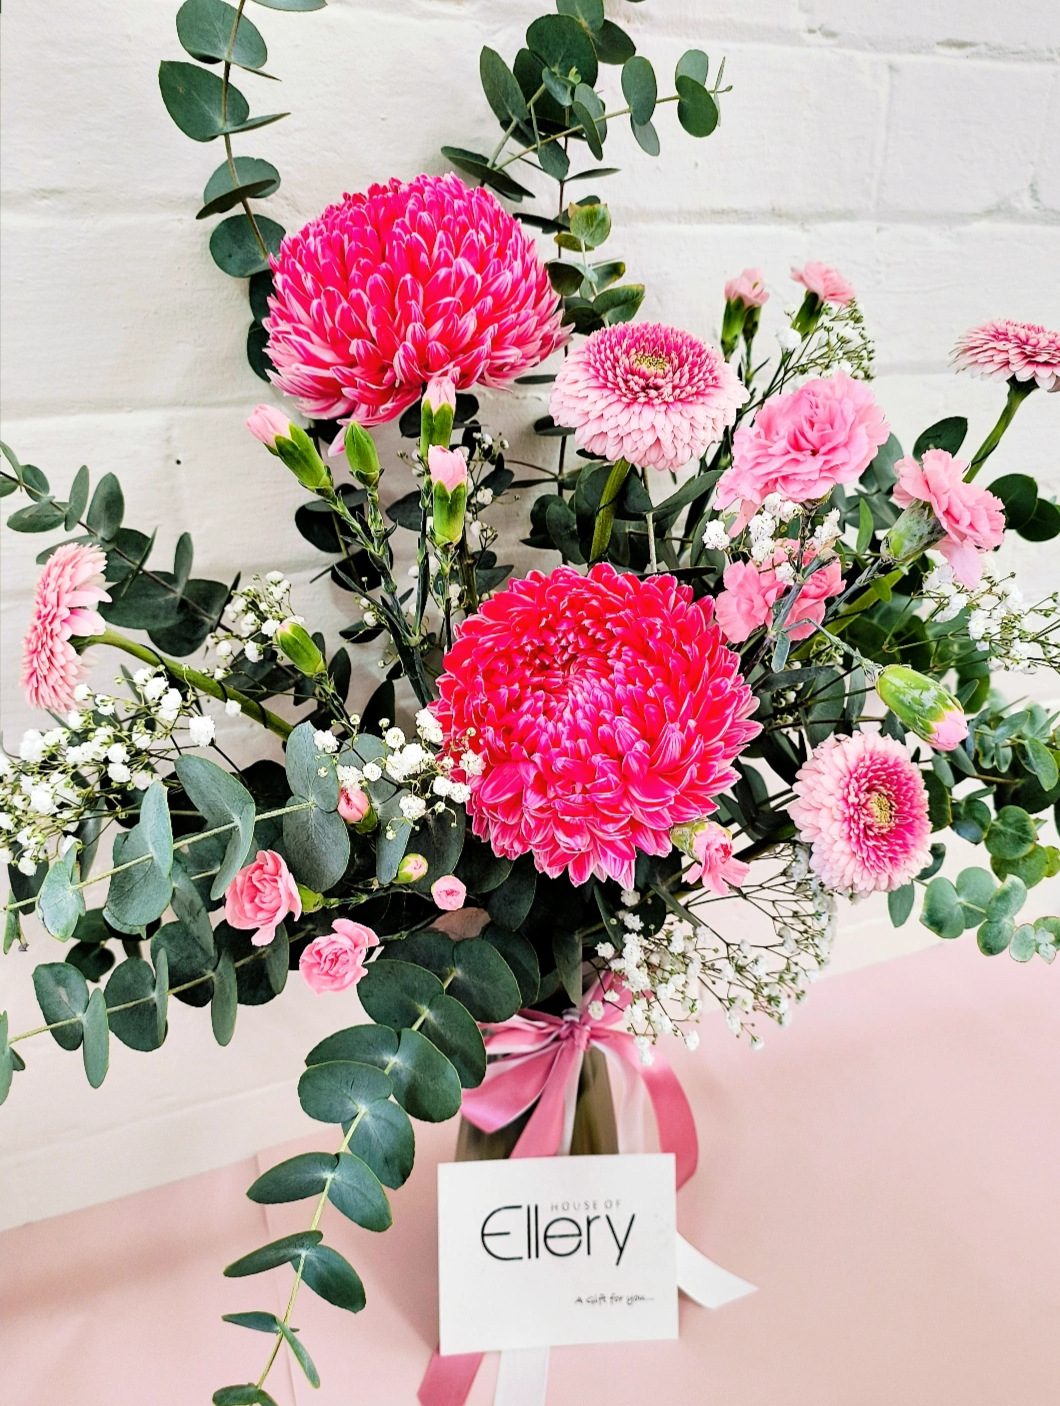 MOTHER'S DAY BUILD A BOUQUET + GIFT WORKSHOP 11th May 10am Central Coast, NSW